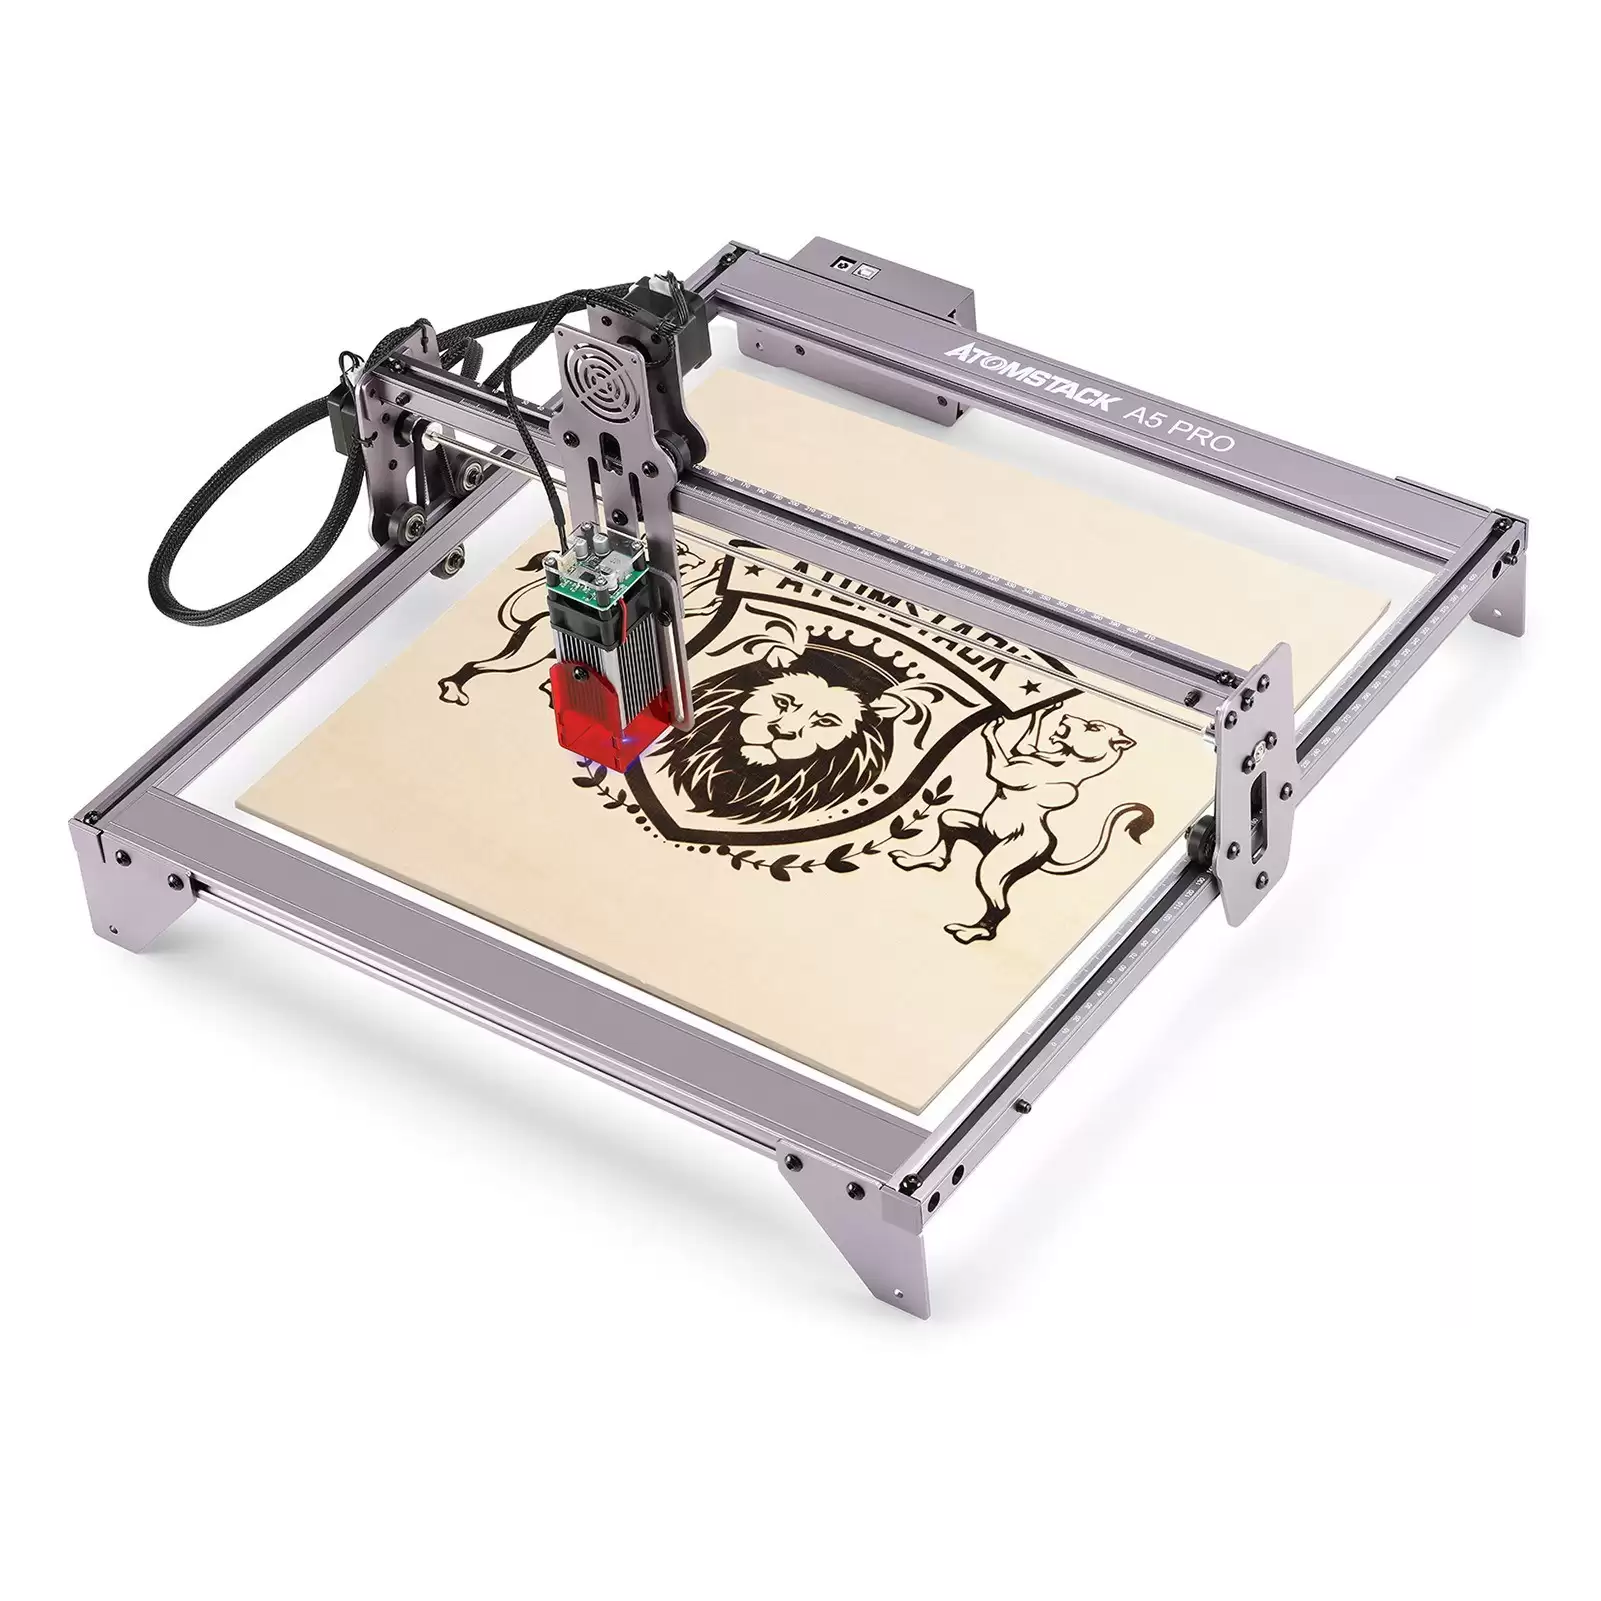 Get Extra $65 Discount On Atomstack A5 Pro 40w Laser Engraver Cnc Desktop Diy Laser With This Coupon Code At Tomtop